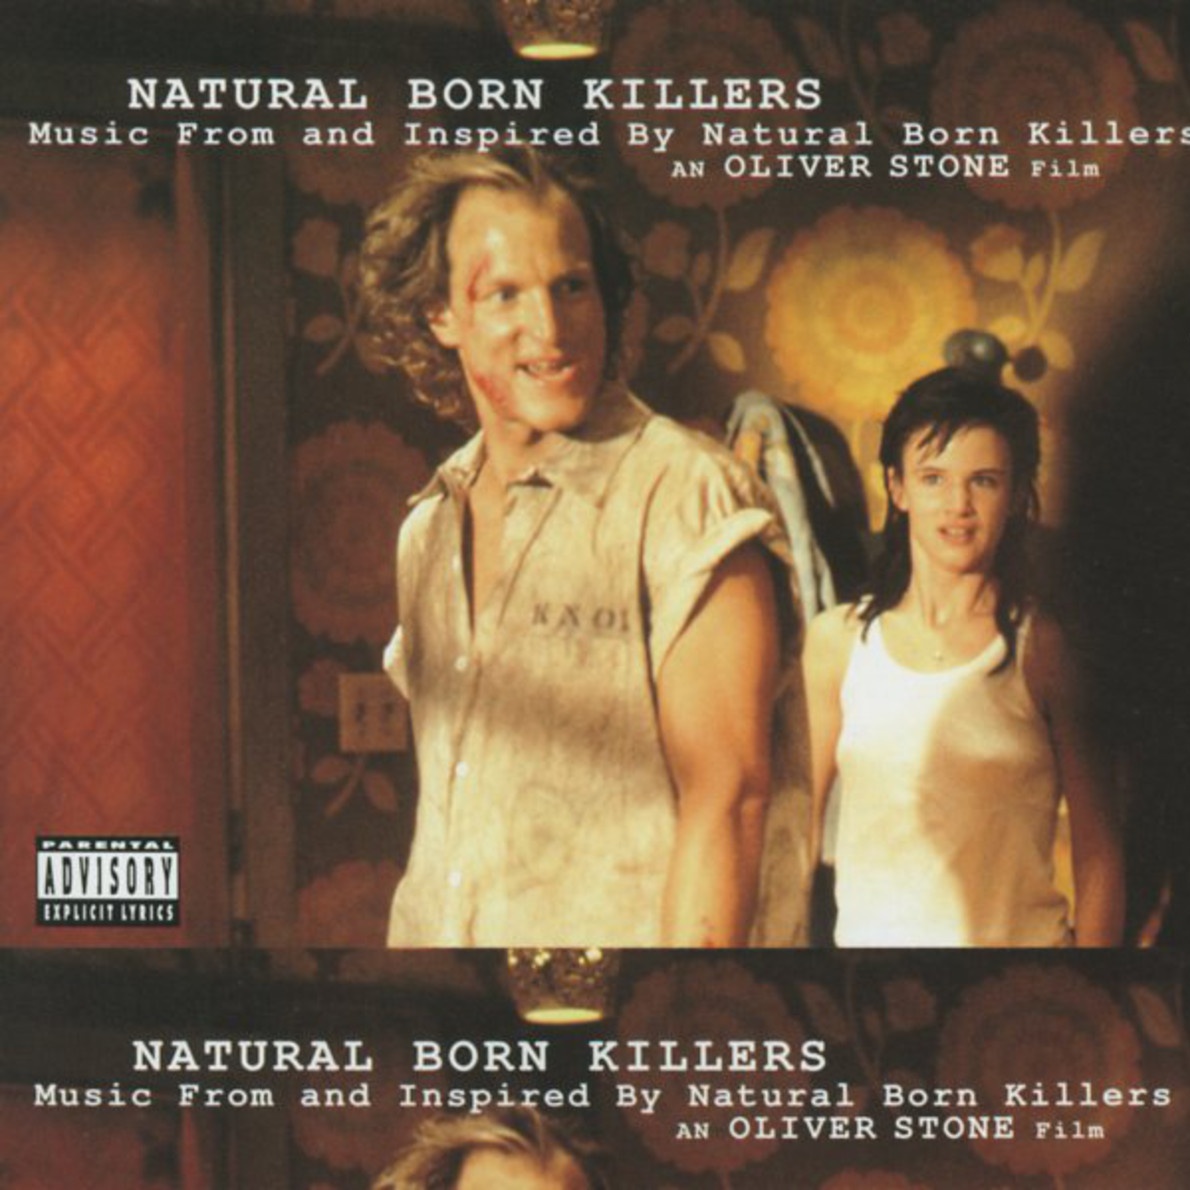 Hungry Ants - From "Natural Born Killers" Soundtrack